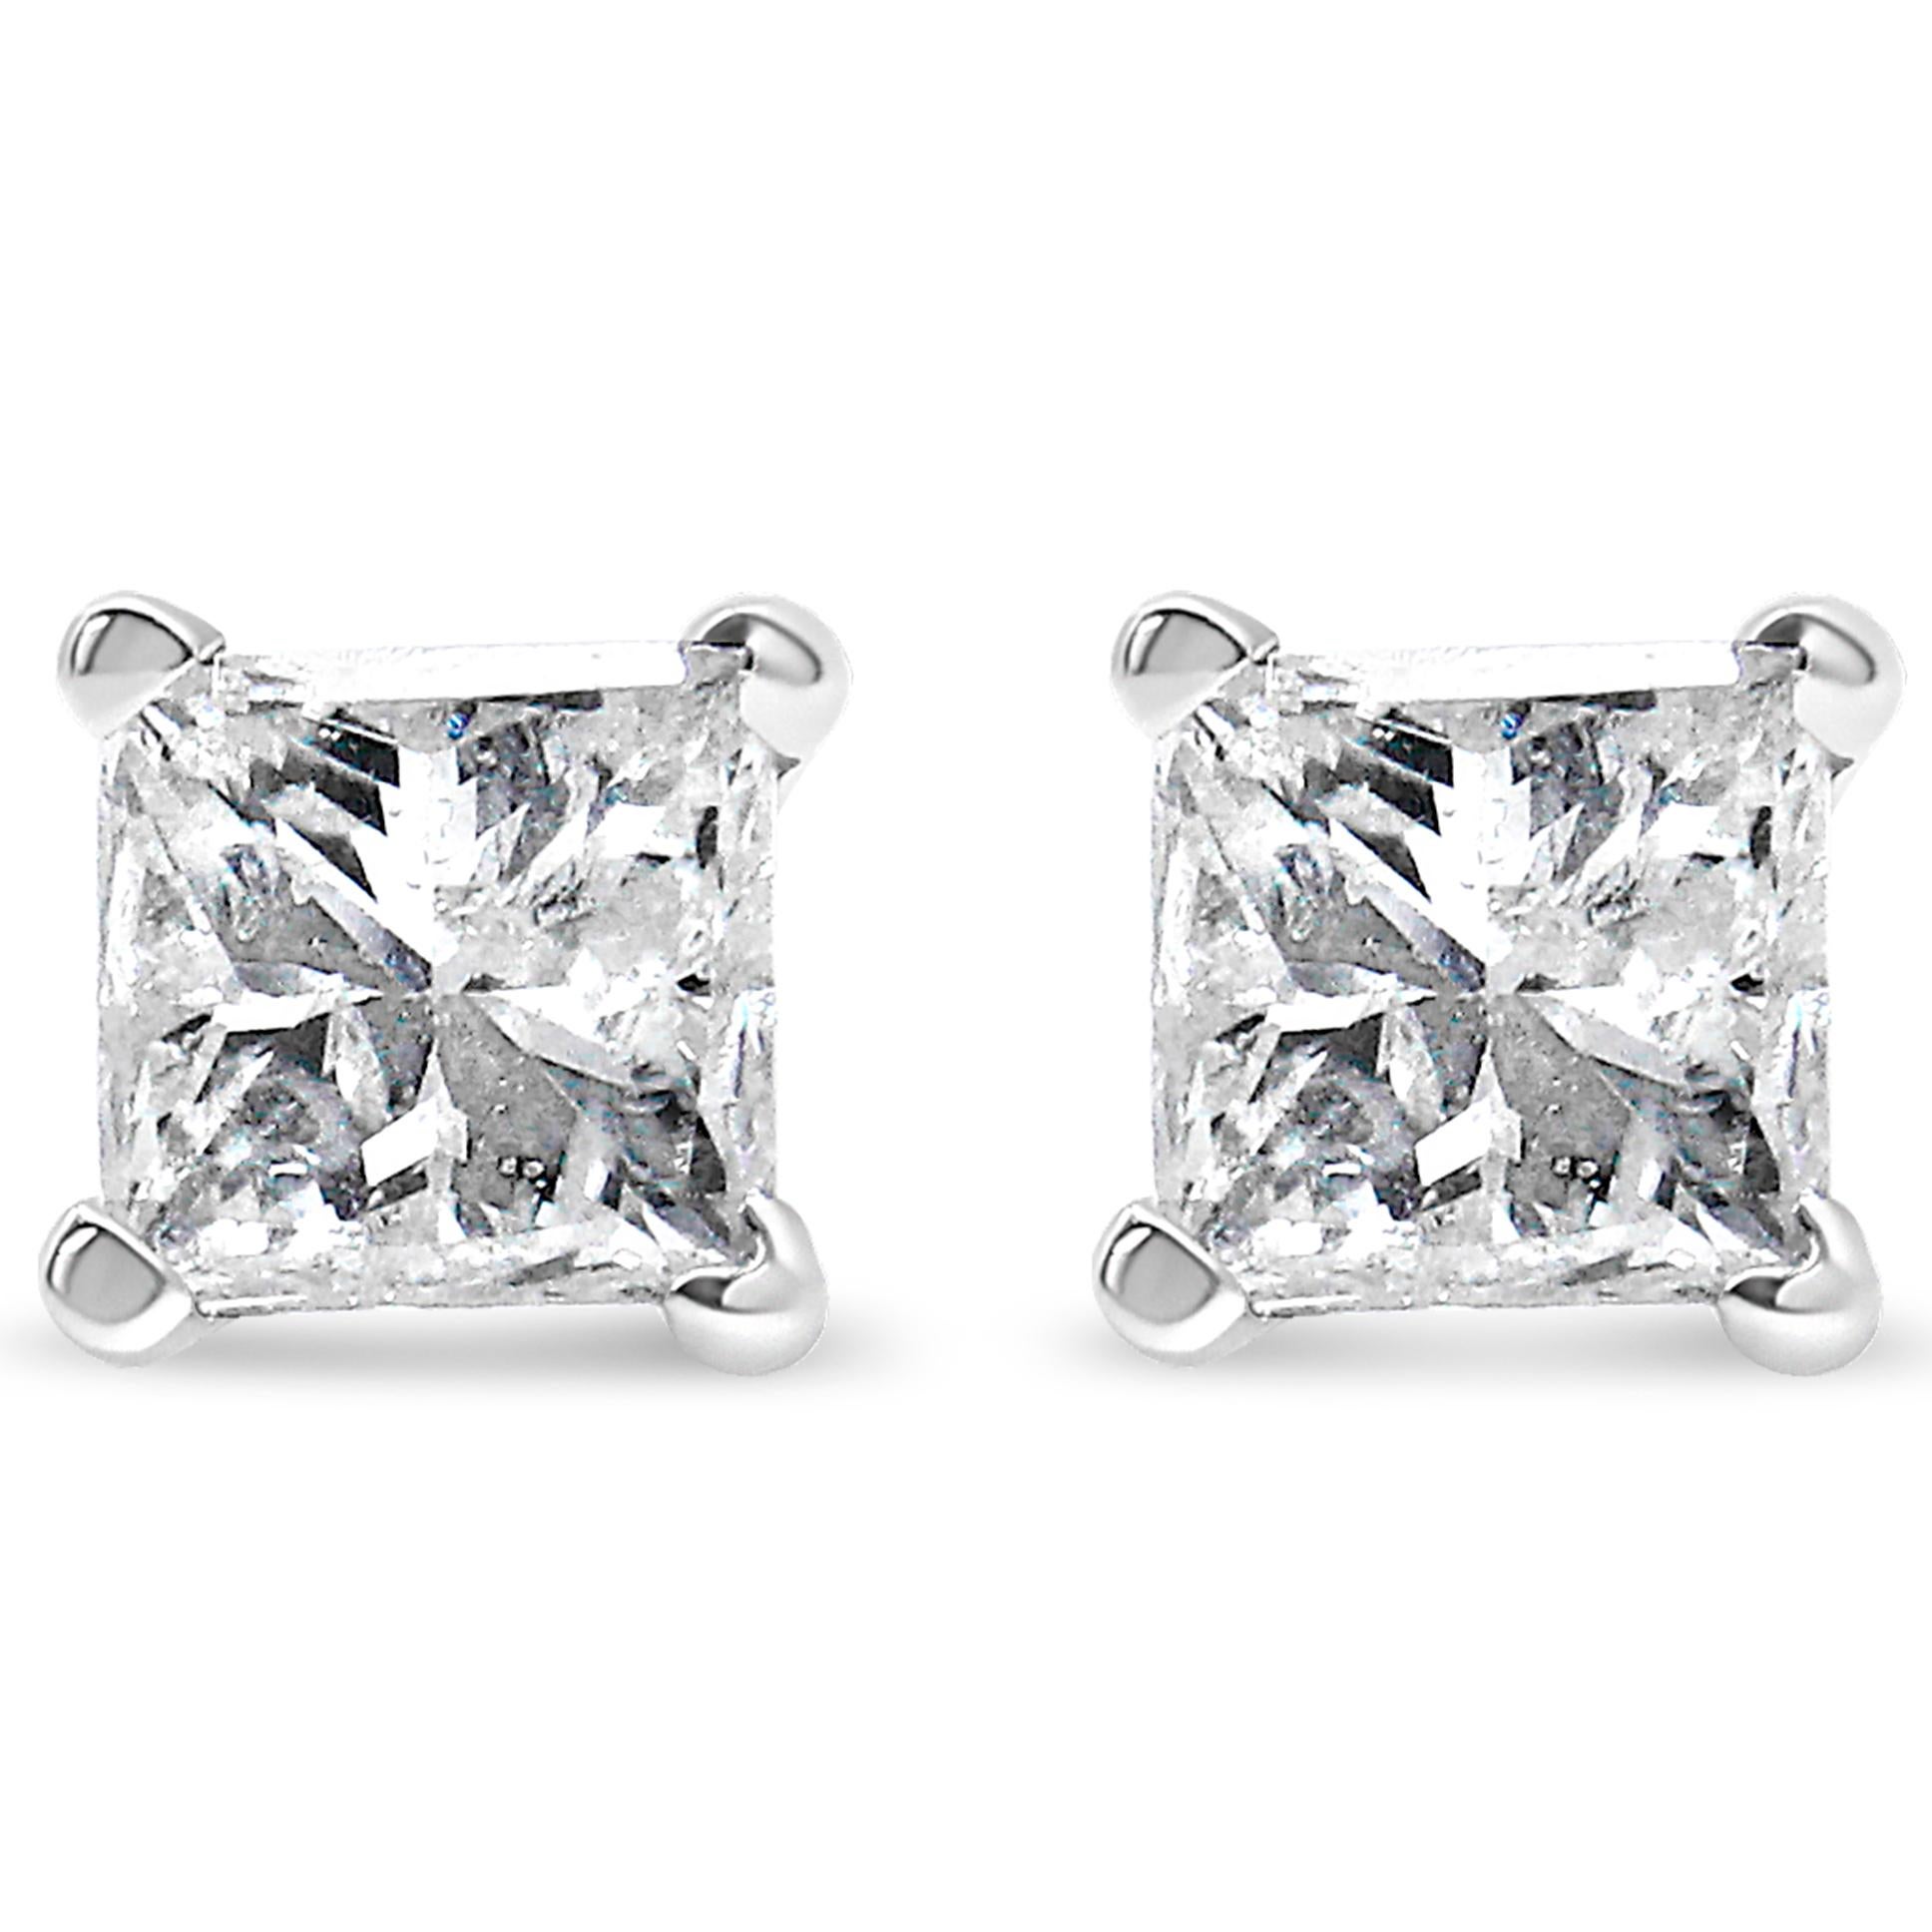 Frame her face with the bold and impressive look of these fabulous princess cut diamond stud earrings. Crafted in 14K white gold, each earring features a mesmerizing 0.375 ct. diamond solitaire in a four-prong setting. Captivating with 0.75 ct tdw